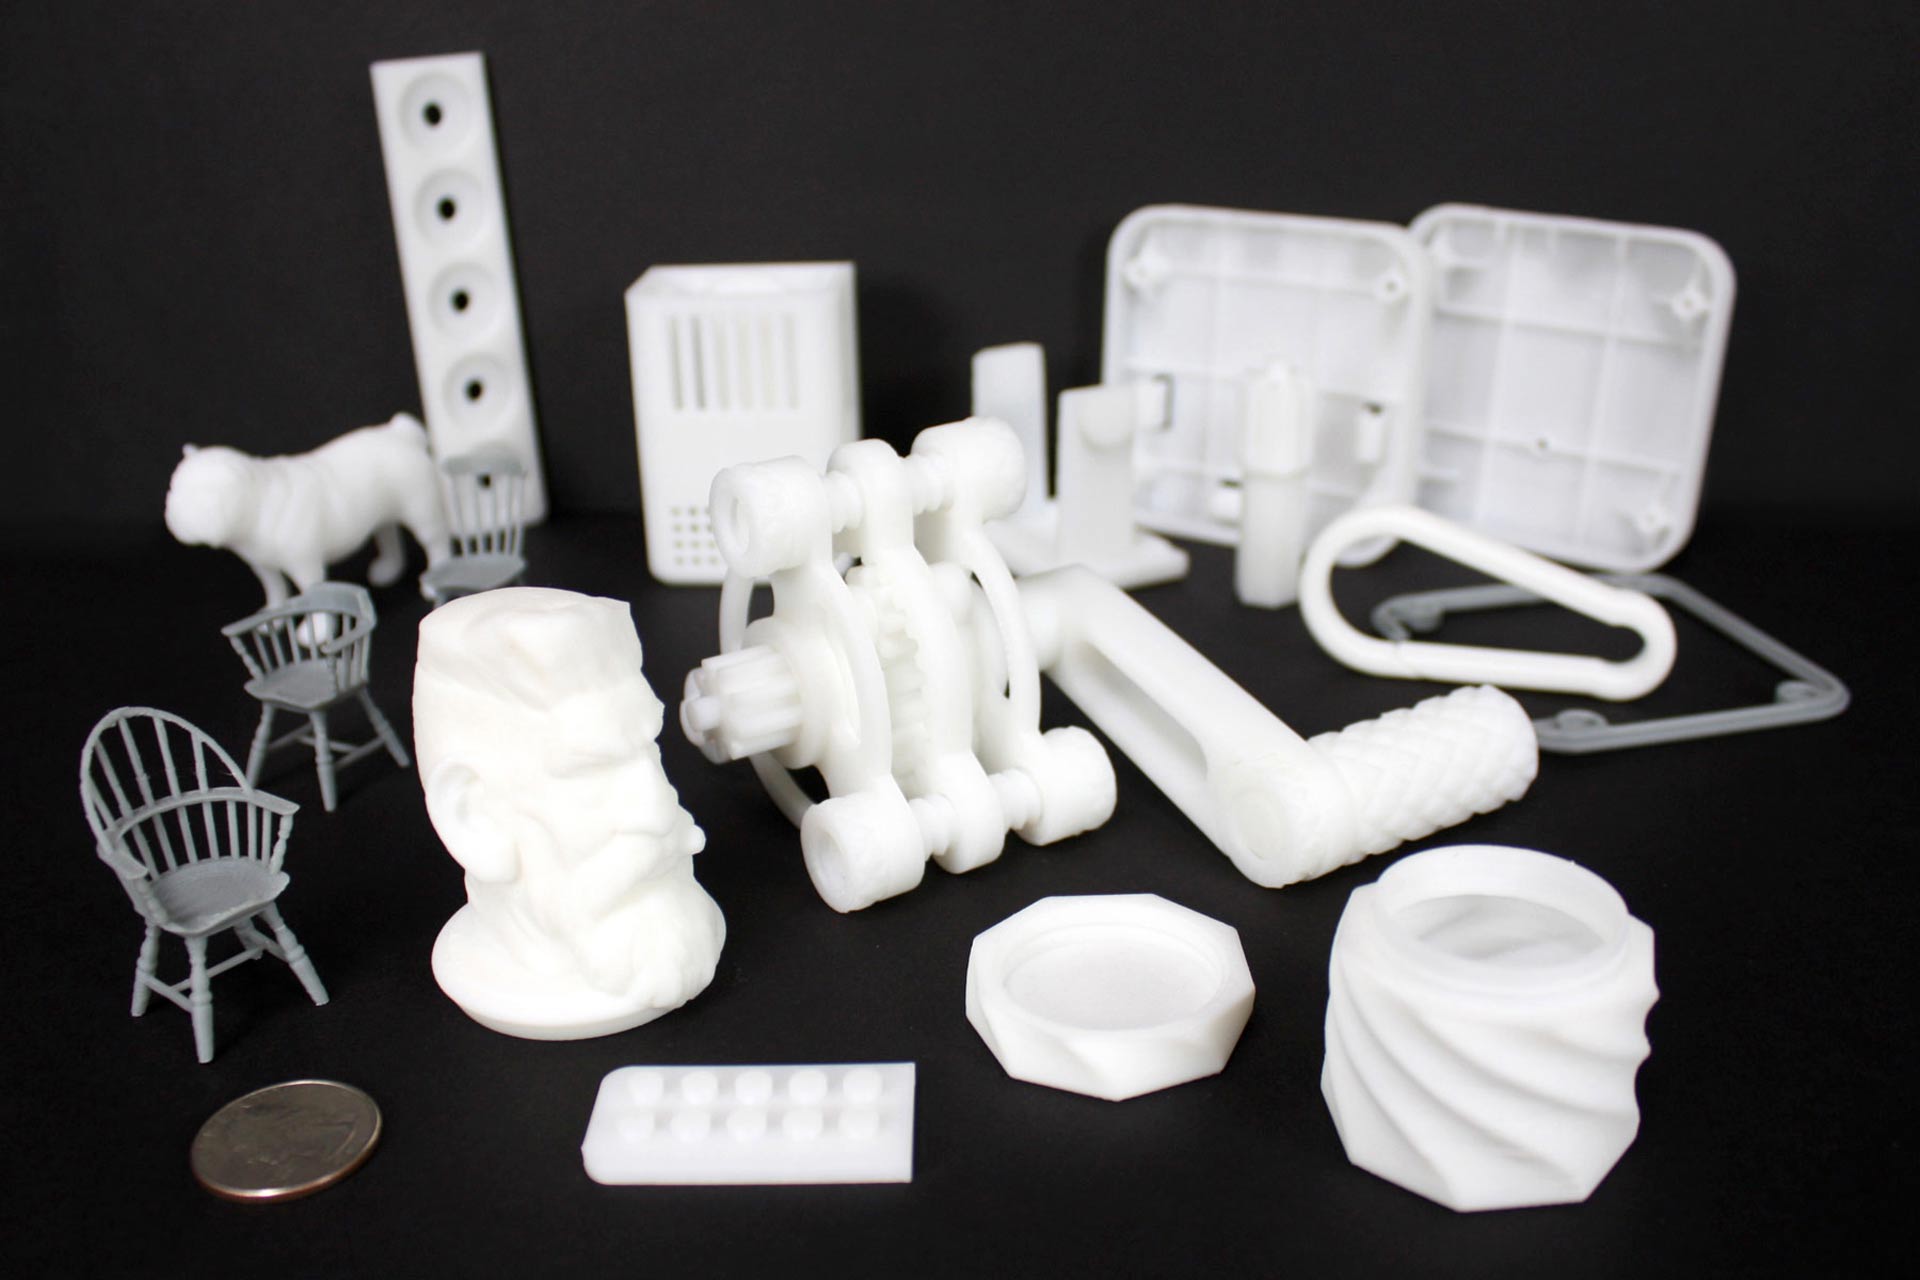 A collection of 3D printed parts